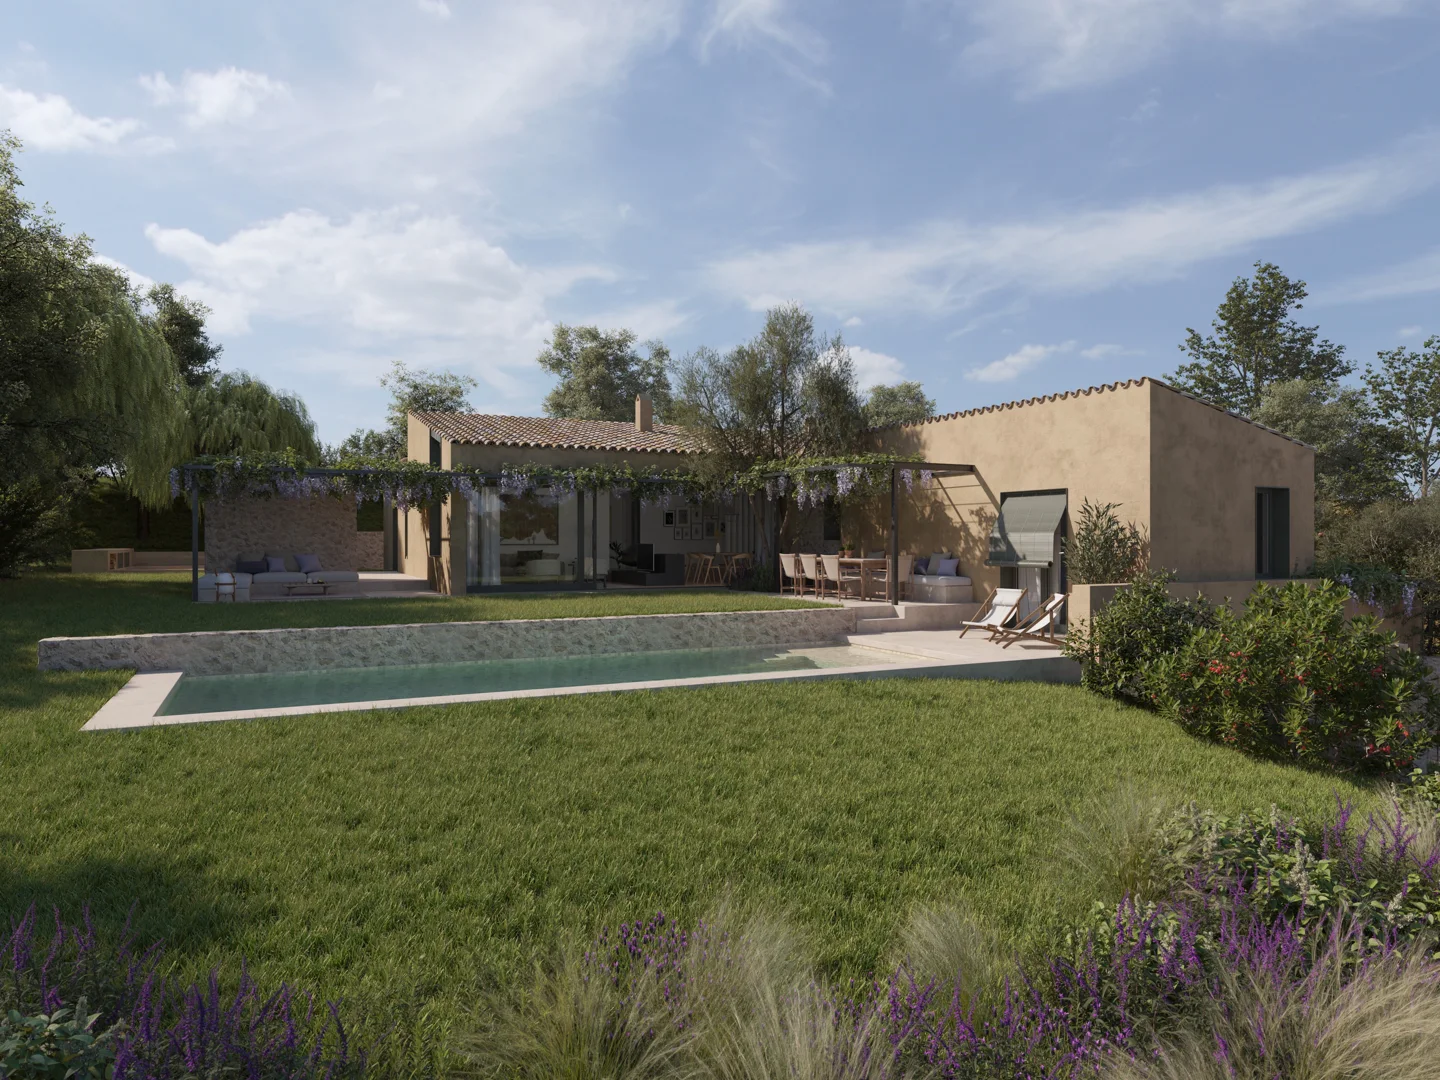 Design houses in the heart of the Empordà